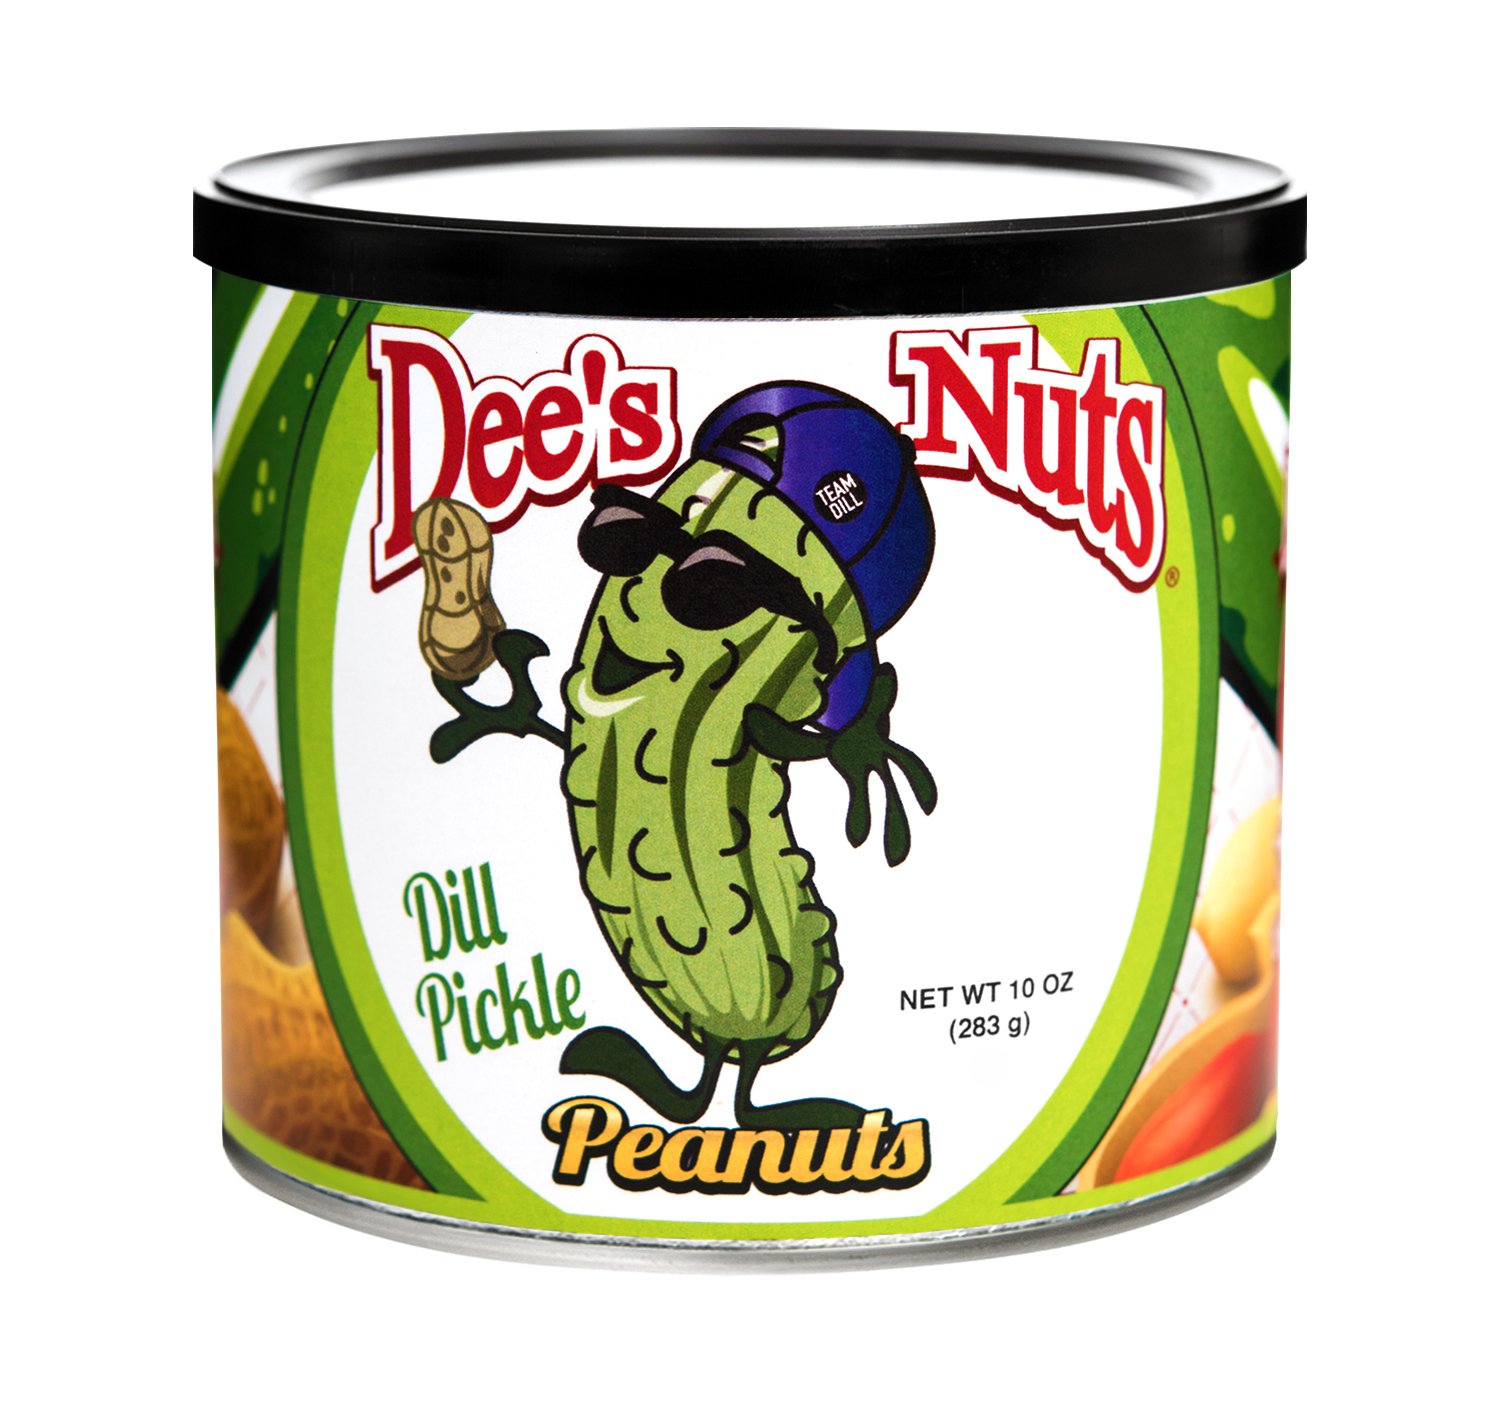 Dee’s Nuts Dill Pickle Flavored Gourmet Peanuts